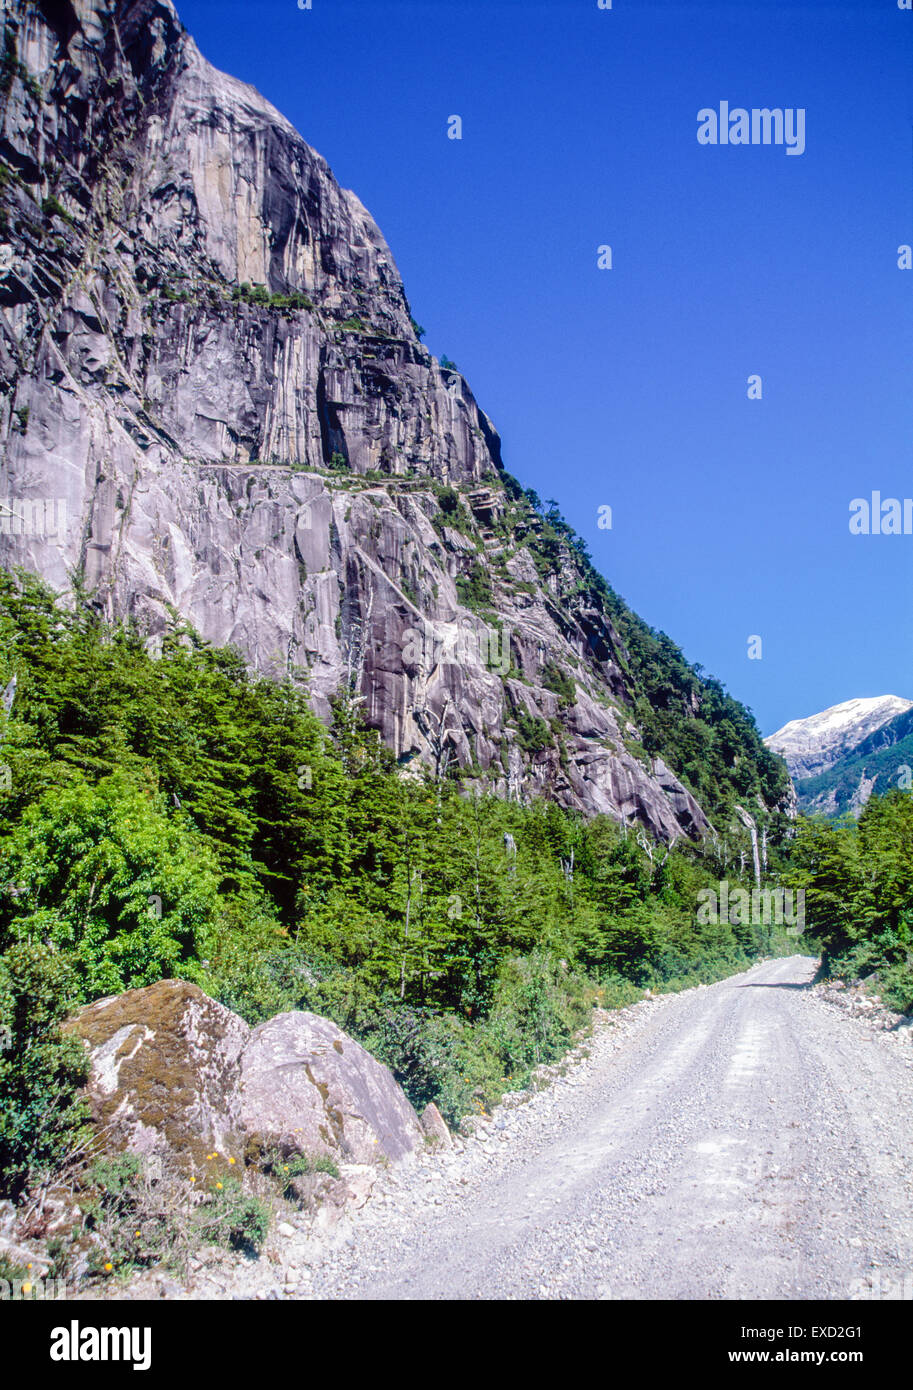 The Carretera Austral (CH-7), formerly known as Carretera General Augusto Pinochet is the name given to Chile's Route 7. Stock Photo